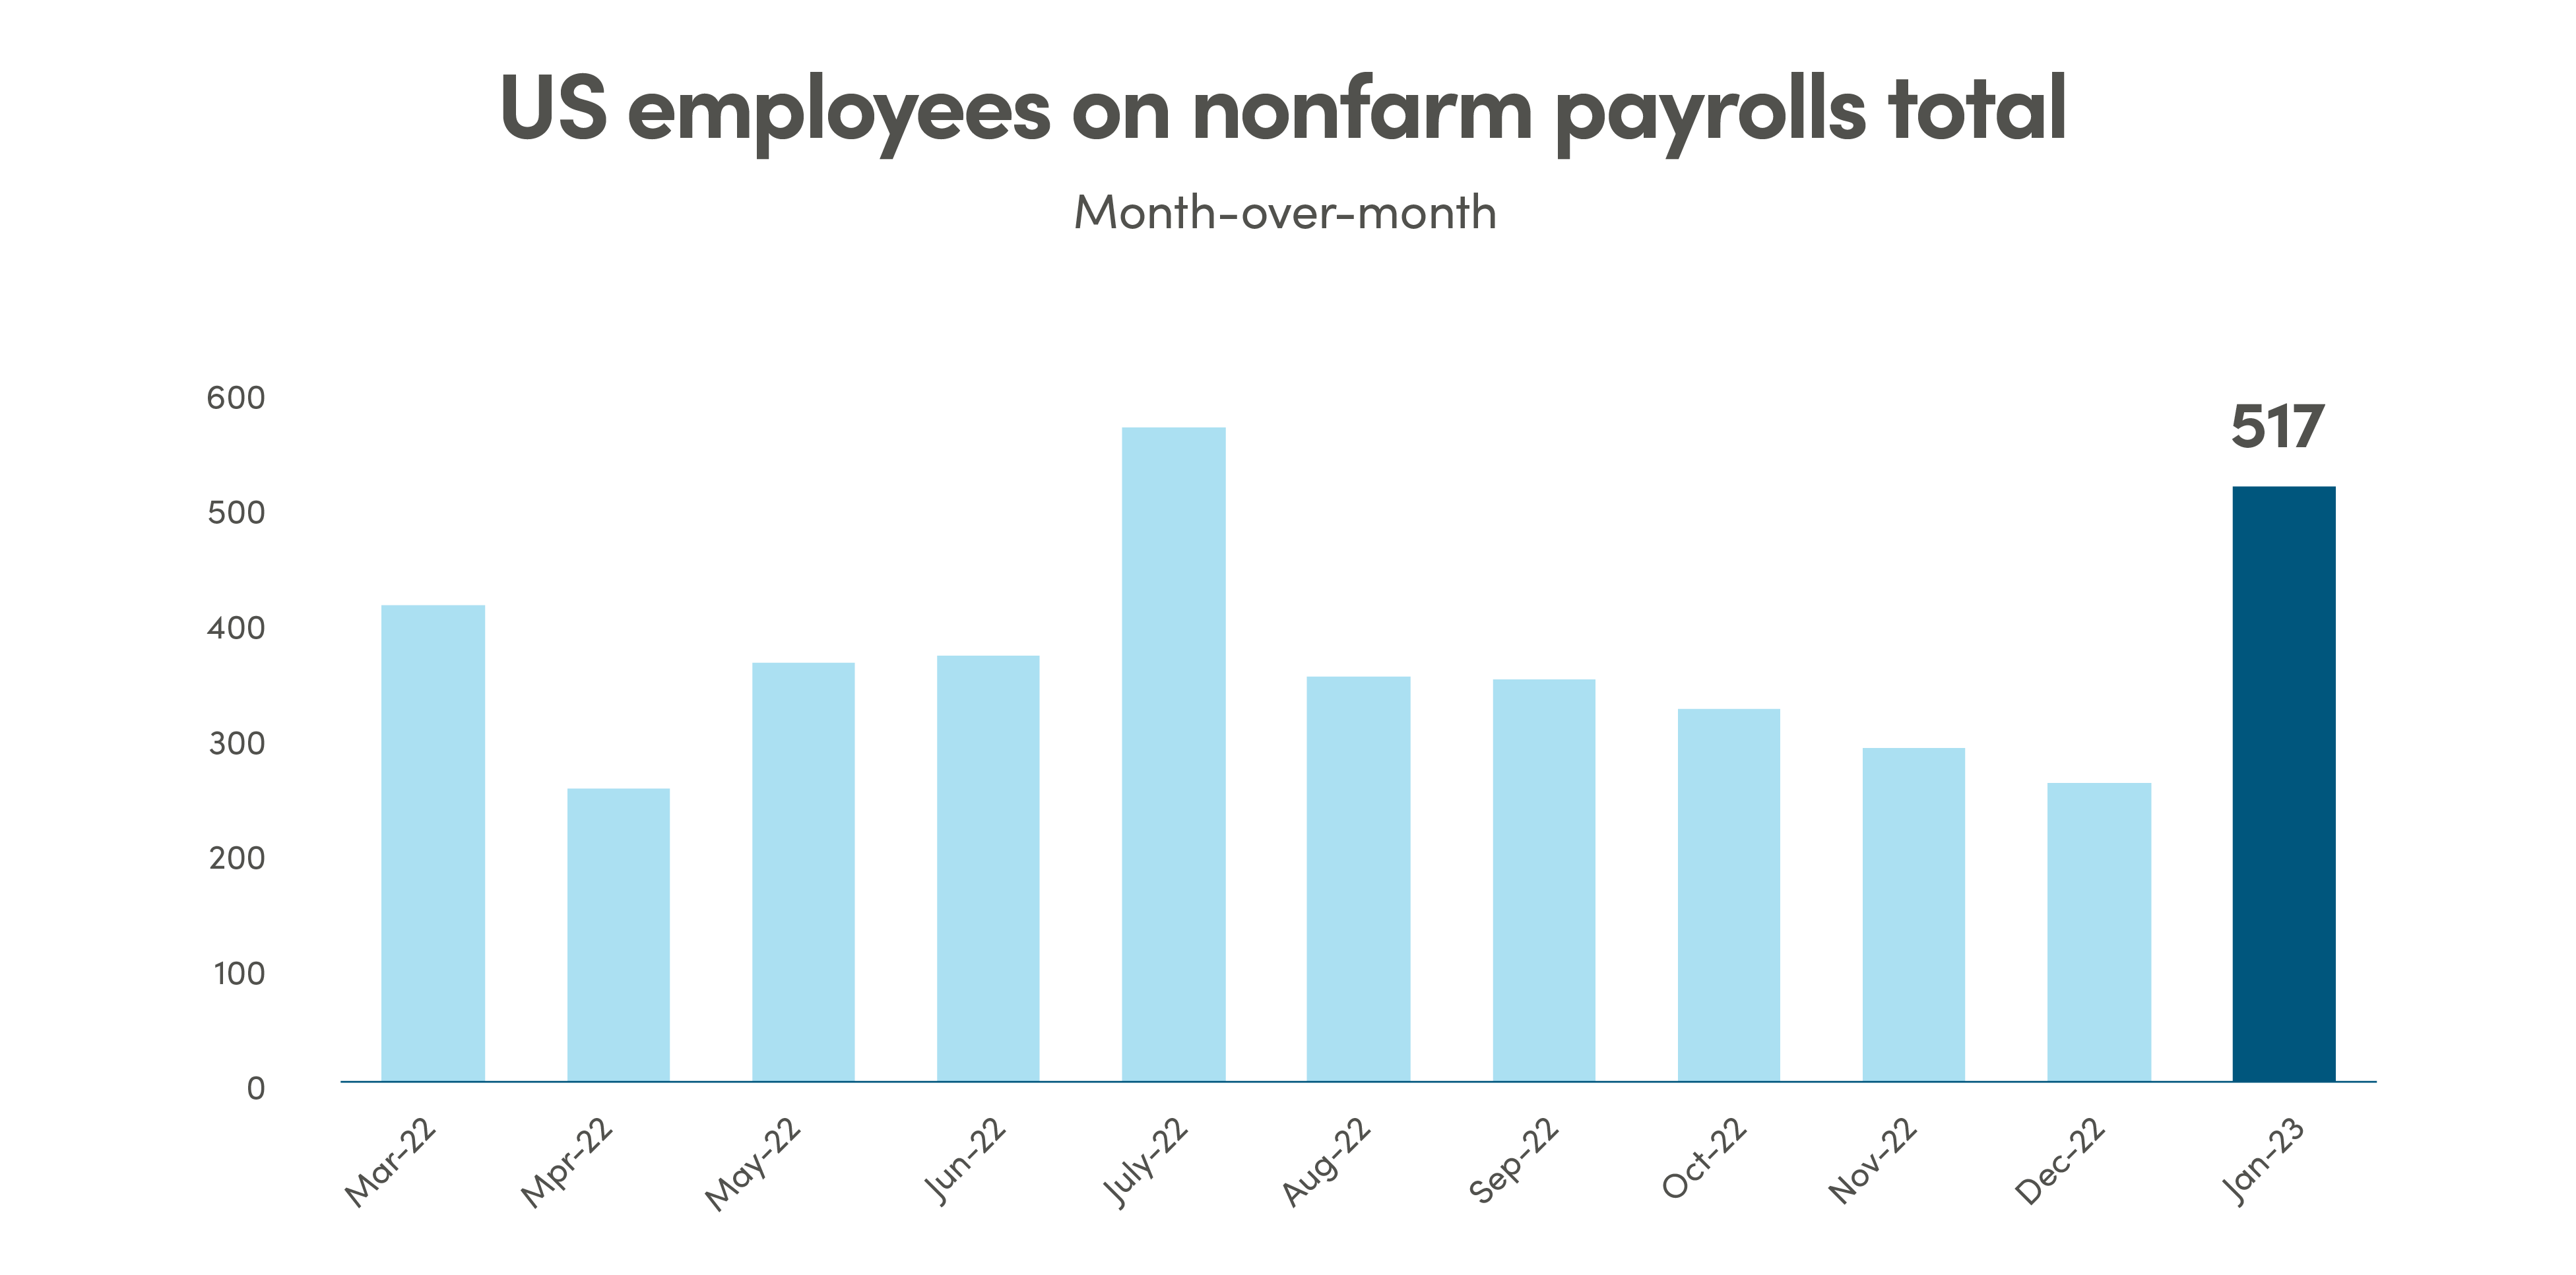 Bar graph showing US employees on nonfarm payrolls from March 2022 to January 2023